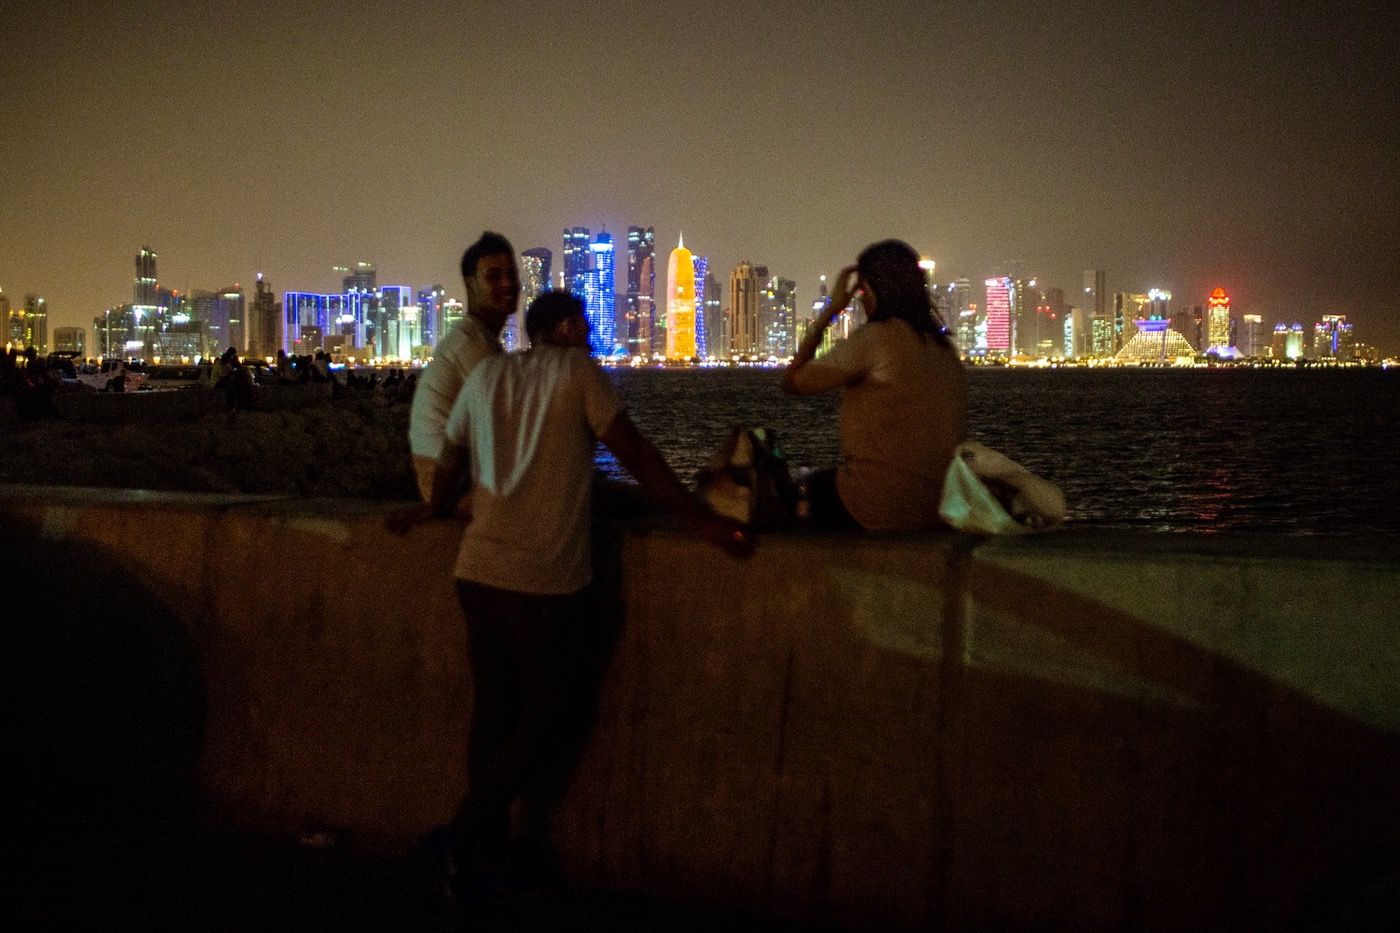 In a country where unmarried sex is outlawed and men and women are socially segregated, people have to find places where they can have sex without being such. This dark parking area along the Corniche, the waterfront promenade around Doha Bay, is a popular spot for couples to get intimate. Image courtesy of News Deeply. Qatar, 2017.